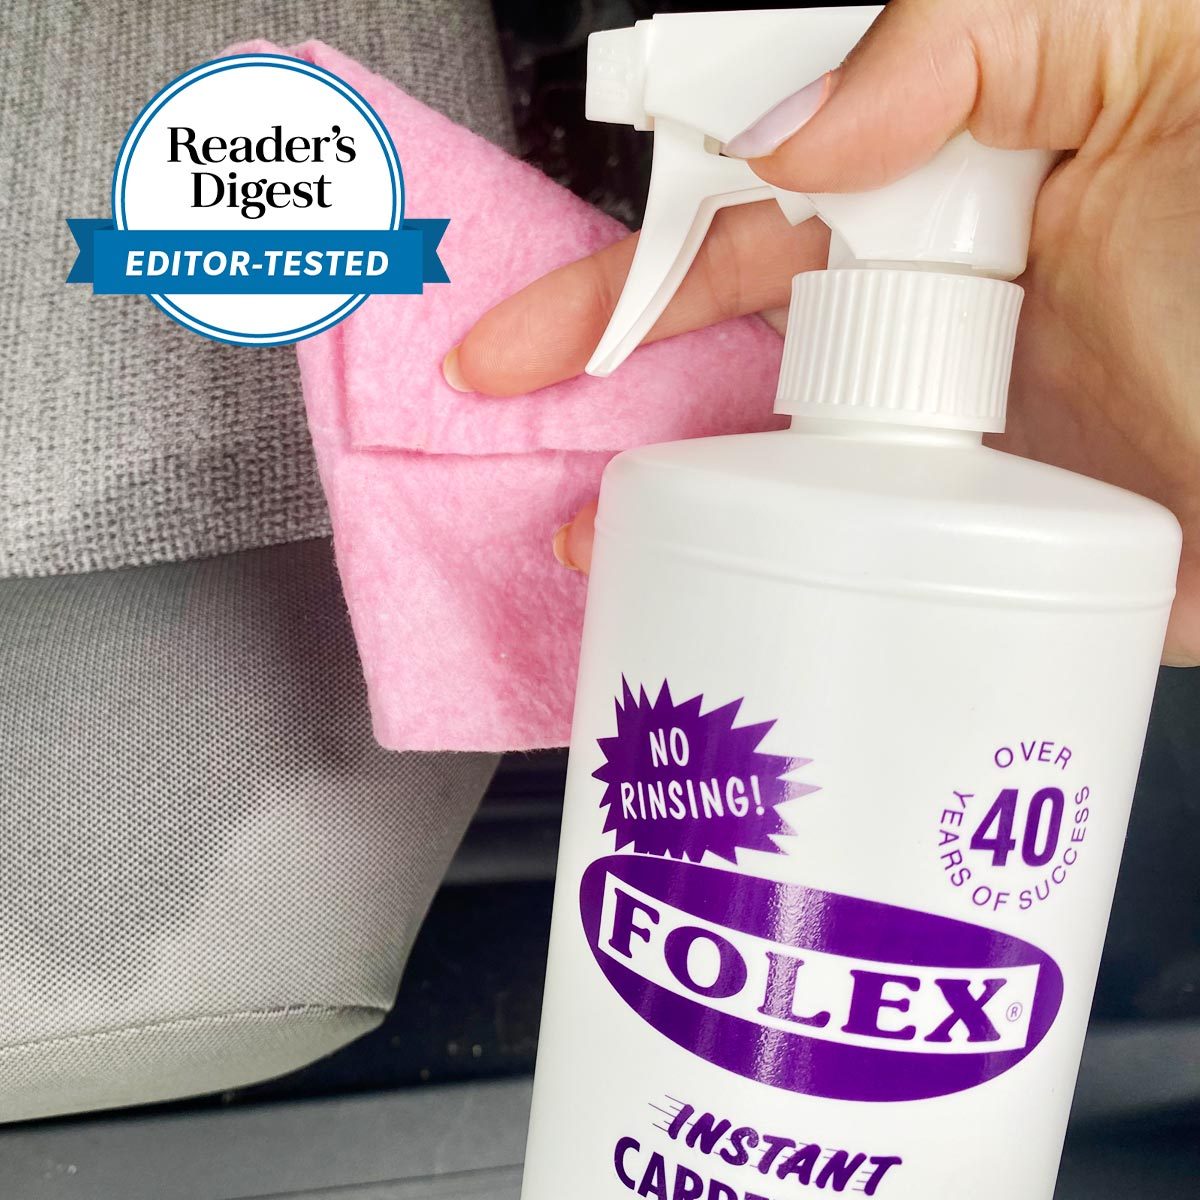 Why Folex Carpet Spot Remover Is a Viral Cleaning Product